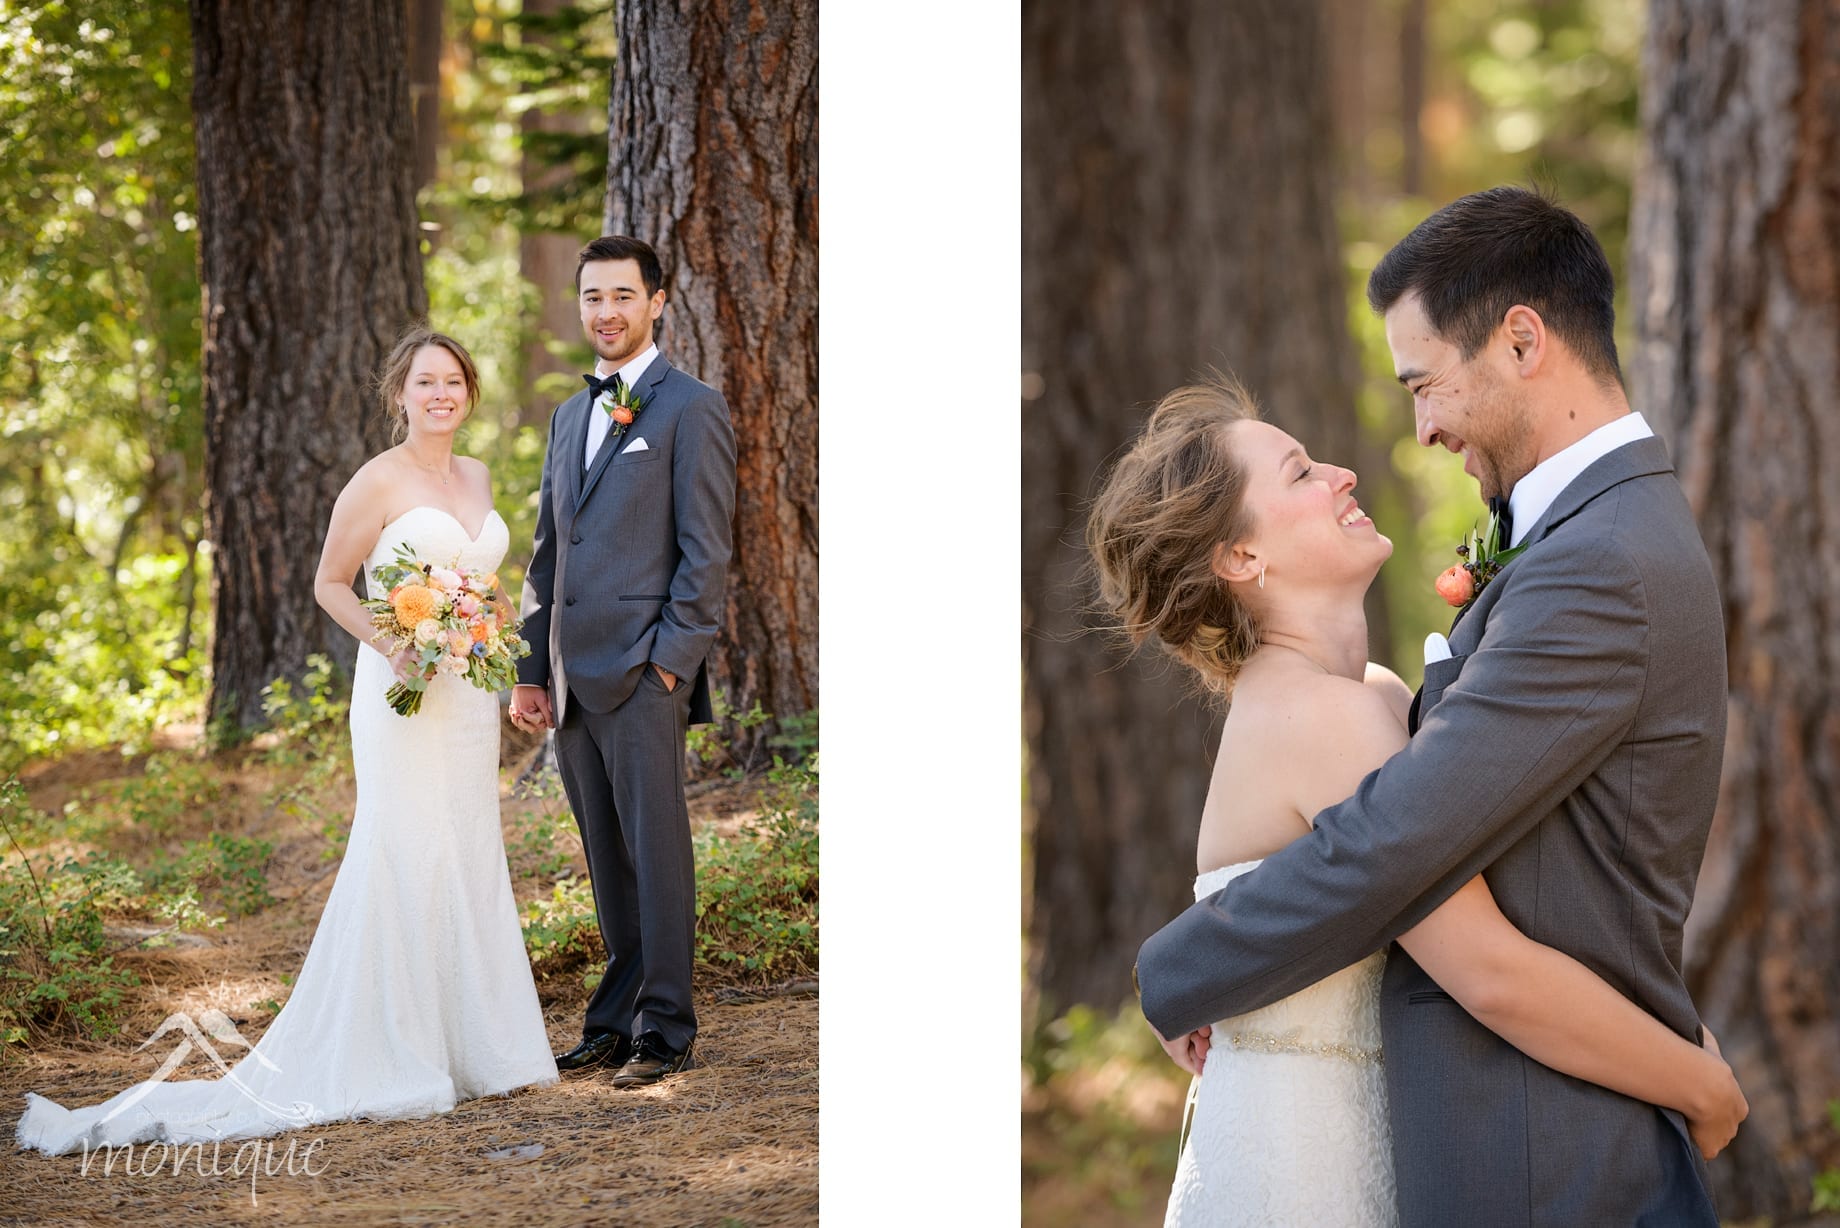 Truckee wedding photography at Lahontan Golf Club with two portraits of the bride and groom in the forest